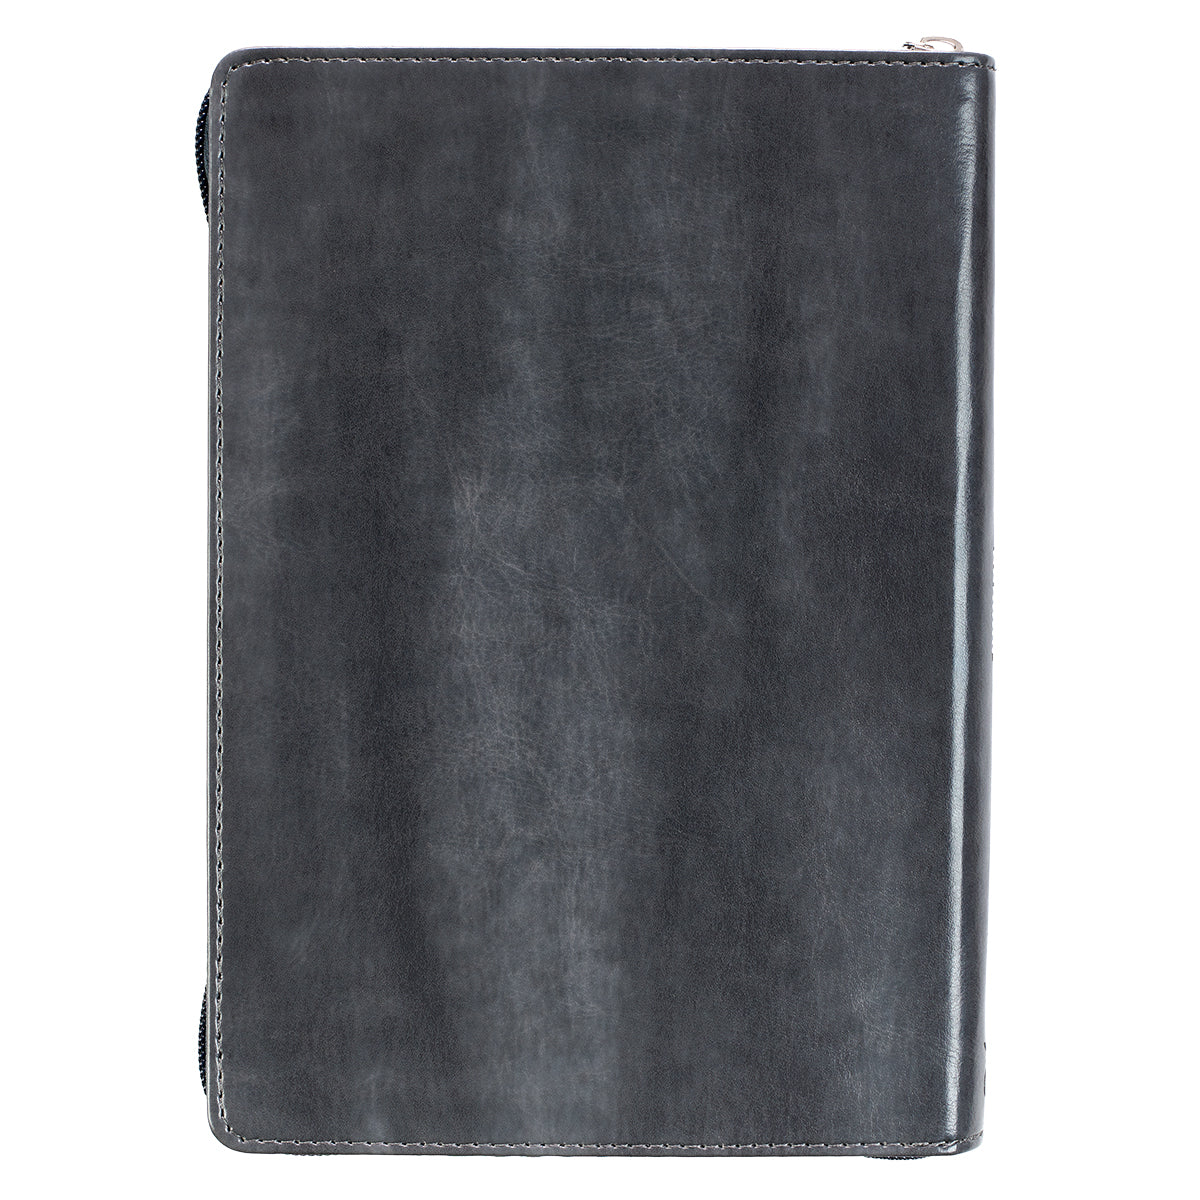 Be Strong and Courageous Classic Grey Faux Leather Journal with Zipper Closure - Joshua 1:9 - The Christian Gift Company